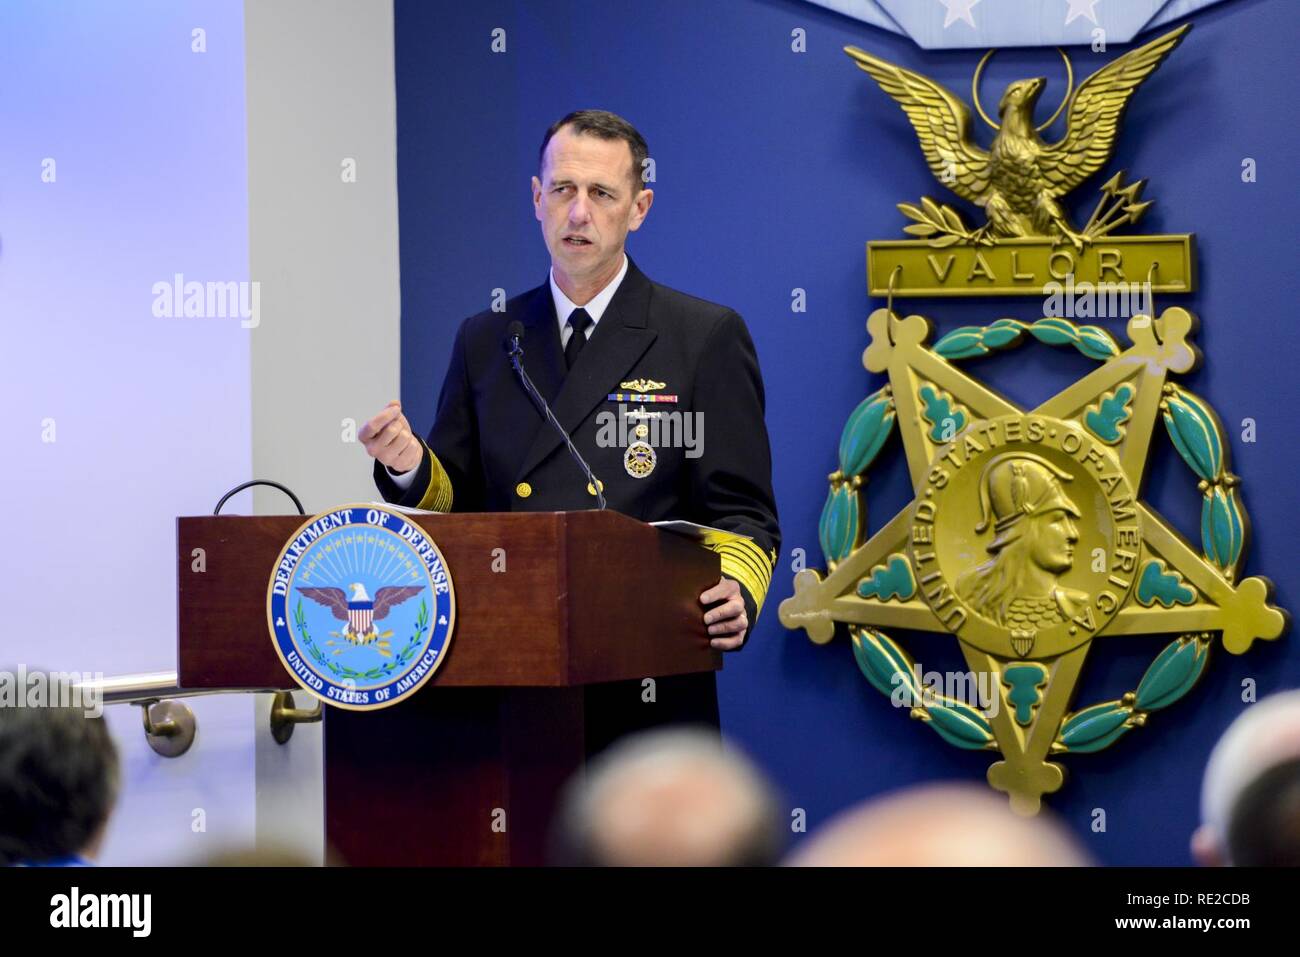 WASHINGTON (Nov. 08, 2016) Chief of Naval Operations (CNO) Adm. John Richardson delivers remarks at the 2016 Vice Admiral James Stockdale Leadership Award ceremony in the Pentagon’s Hall of Heroes. The Stockdale Leadership Award is presented annually to two commissioned officers on active duty below the rank of Captain who are in command of a single ship, submarine, aviation squadron or operational warfare unit at the time of nomination. The award is unique in that candidates are nominated by their peers who themselves must be eligible for the award. Stock Photo